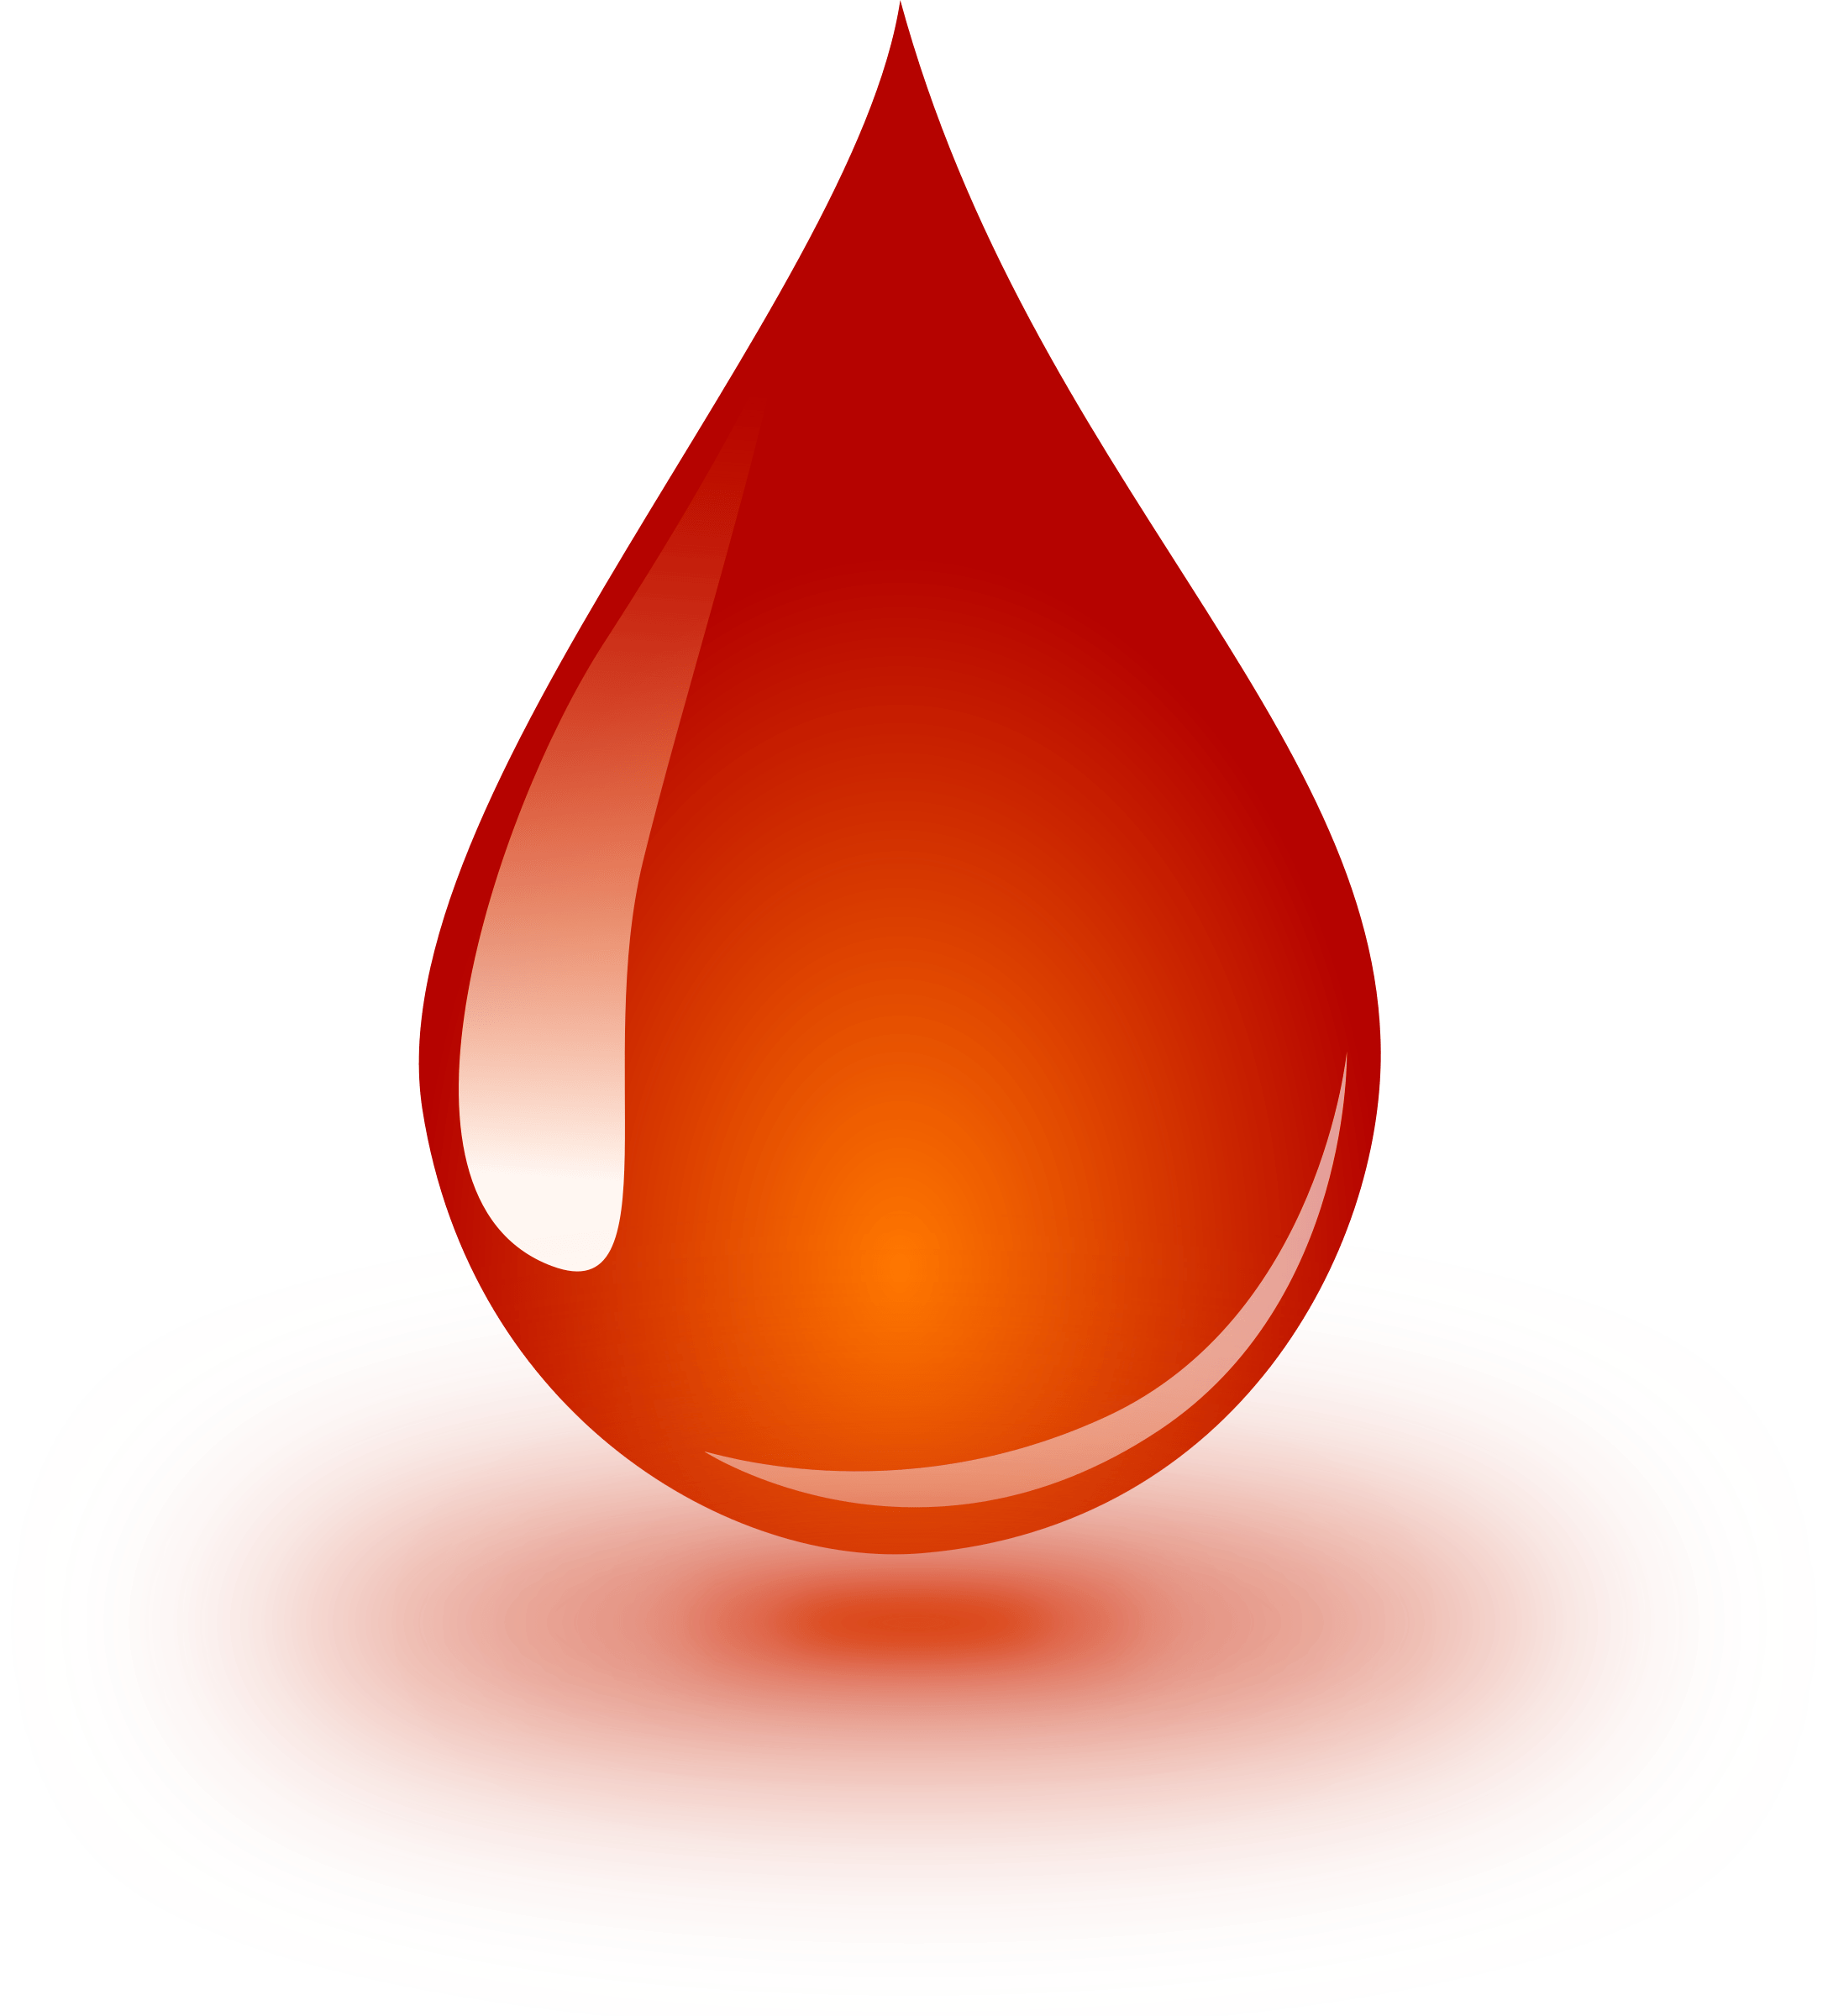 Blood Drop Logo - Blood Drop A drop of blood. I hope this can be used